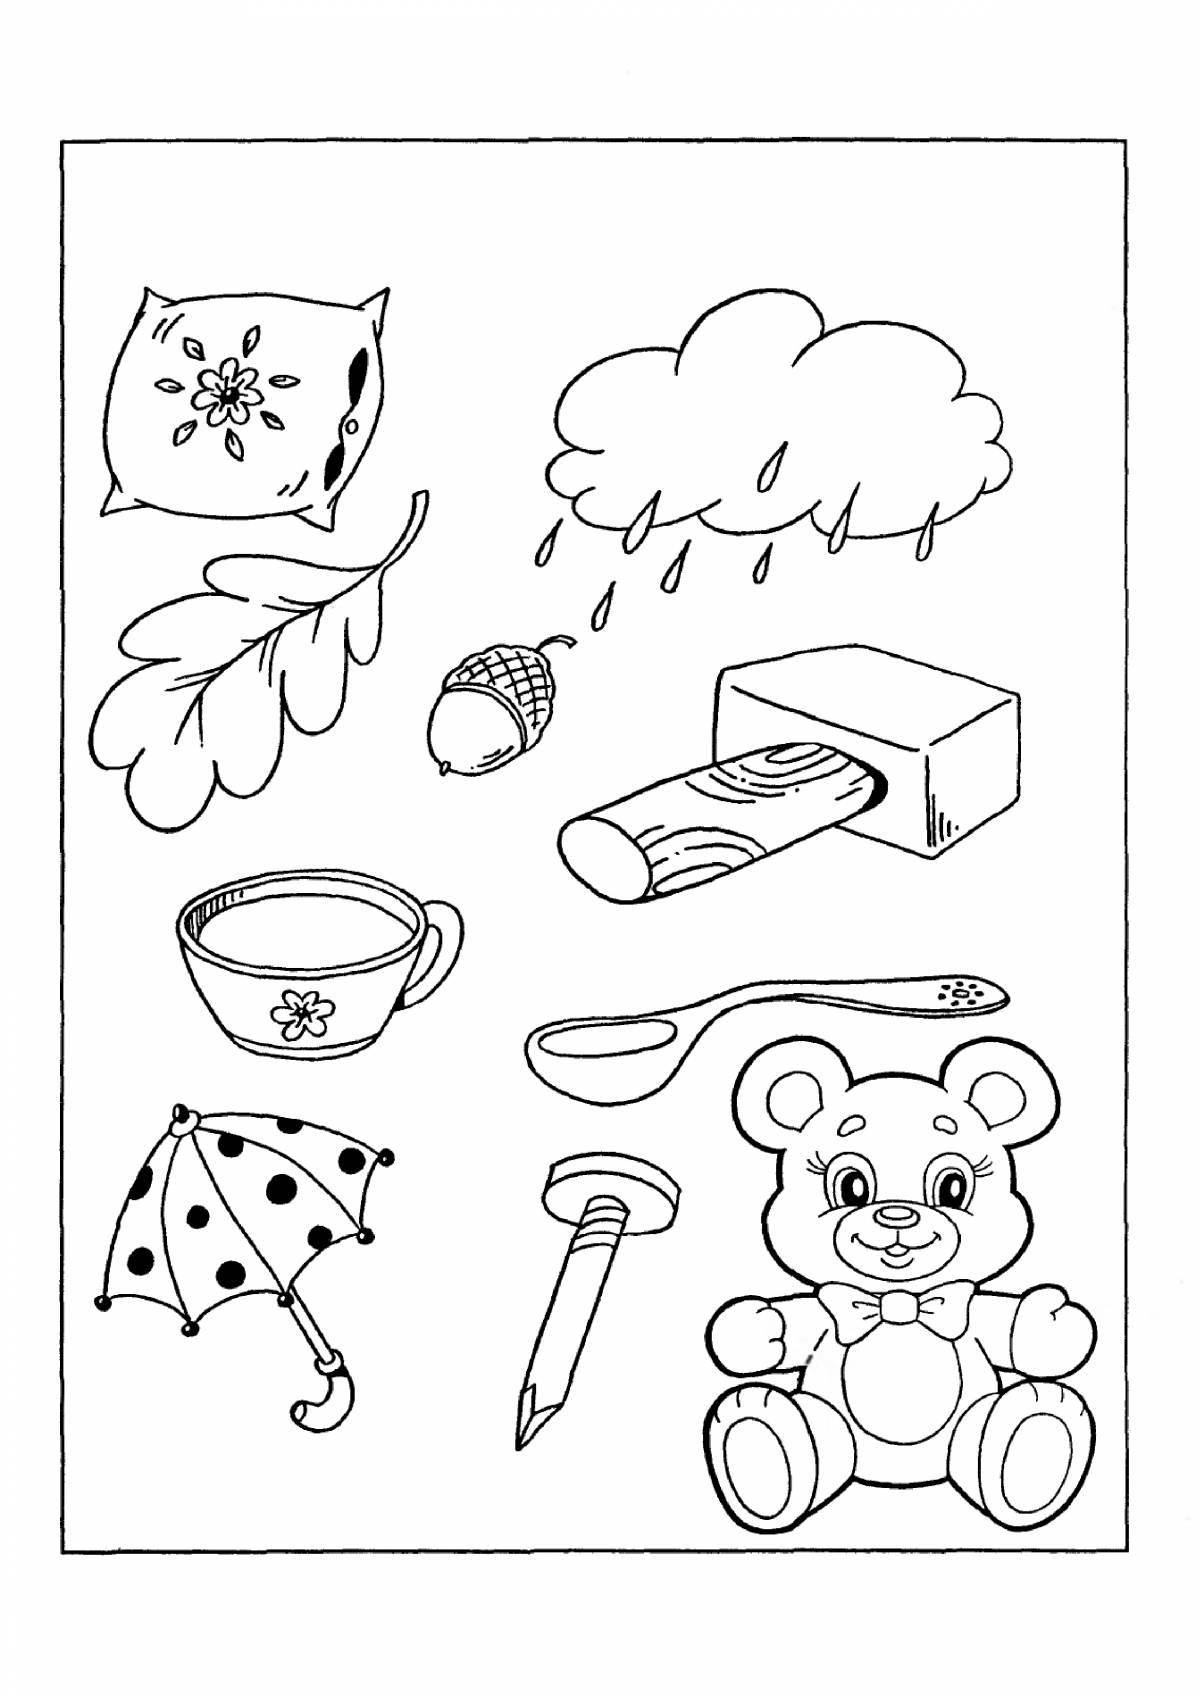 Creative coloring book for children, educational